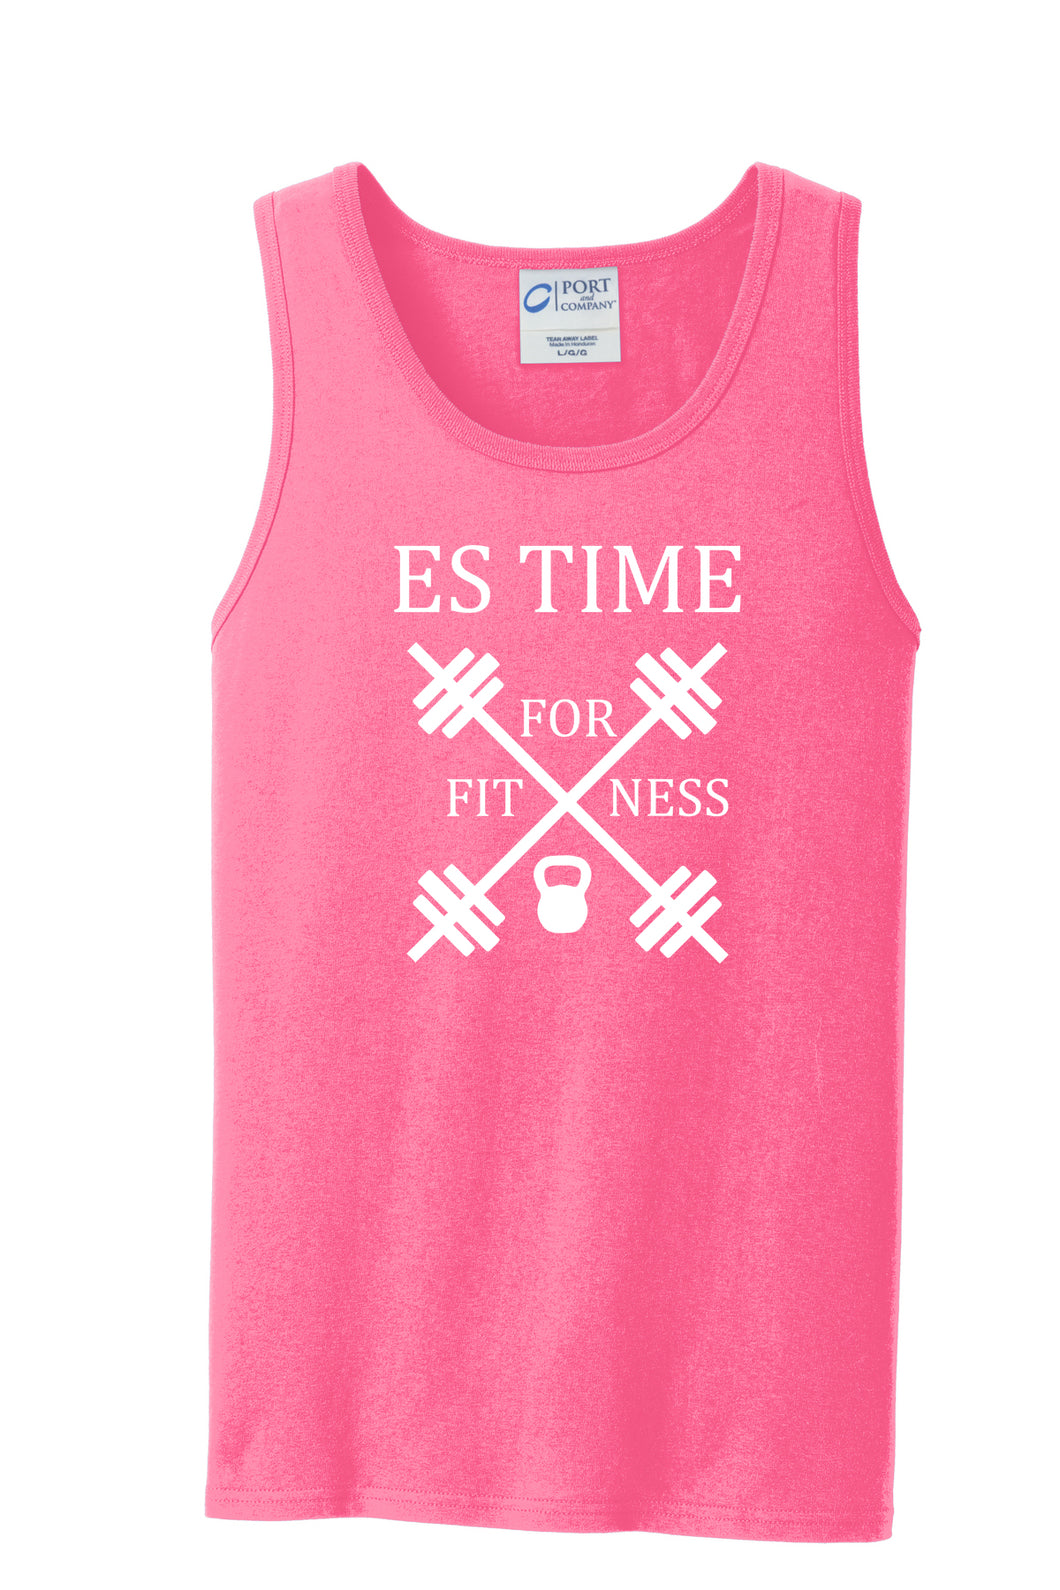 ES TIME FOR FITNESS Tank Top Pink  White Logo Different Sizes